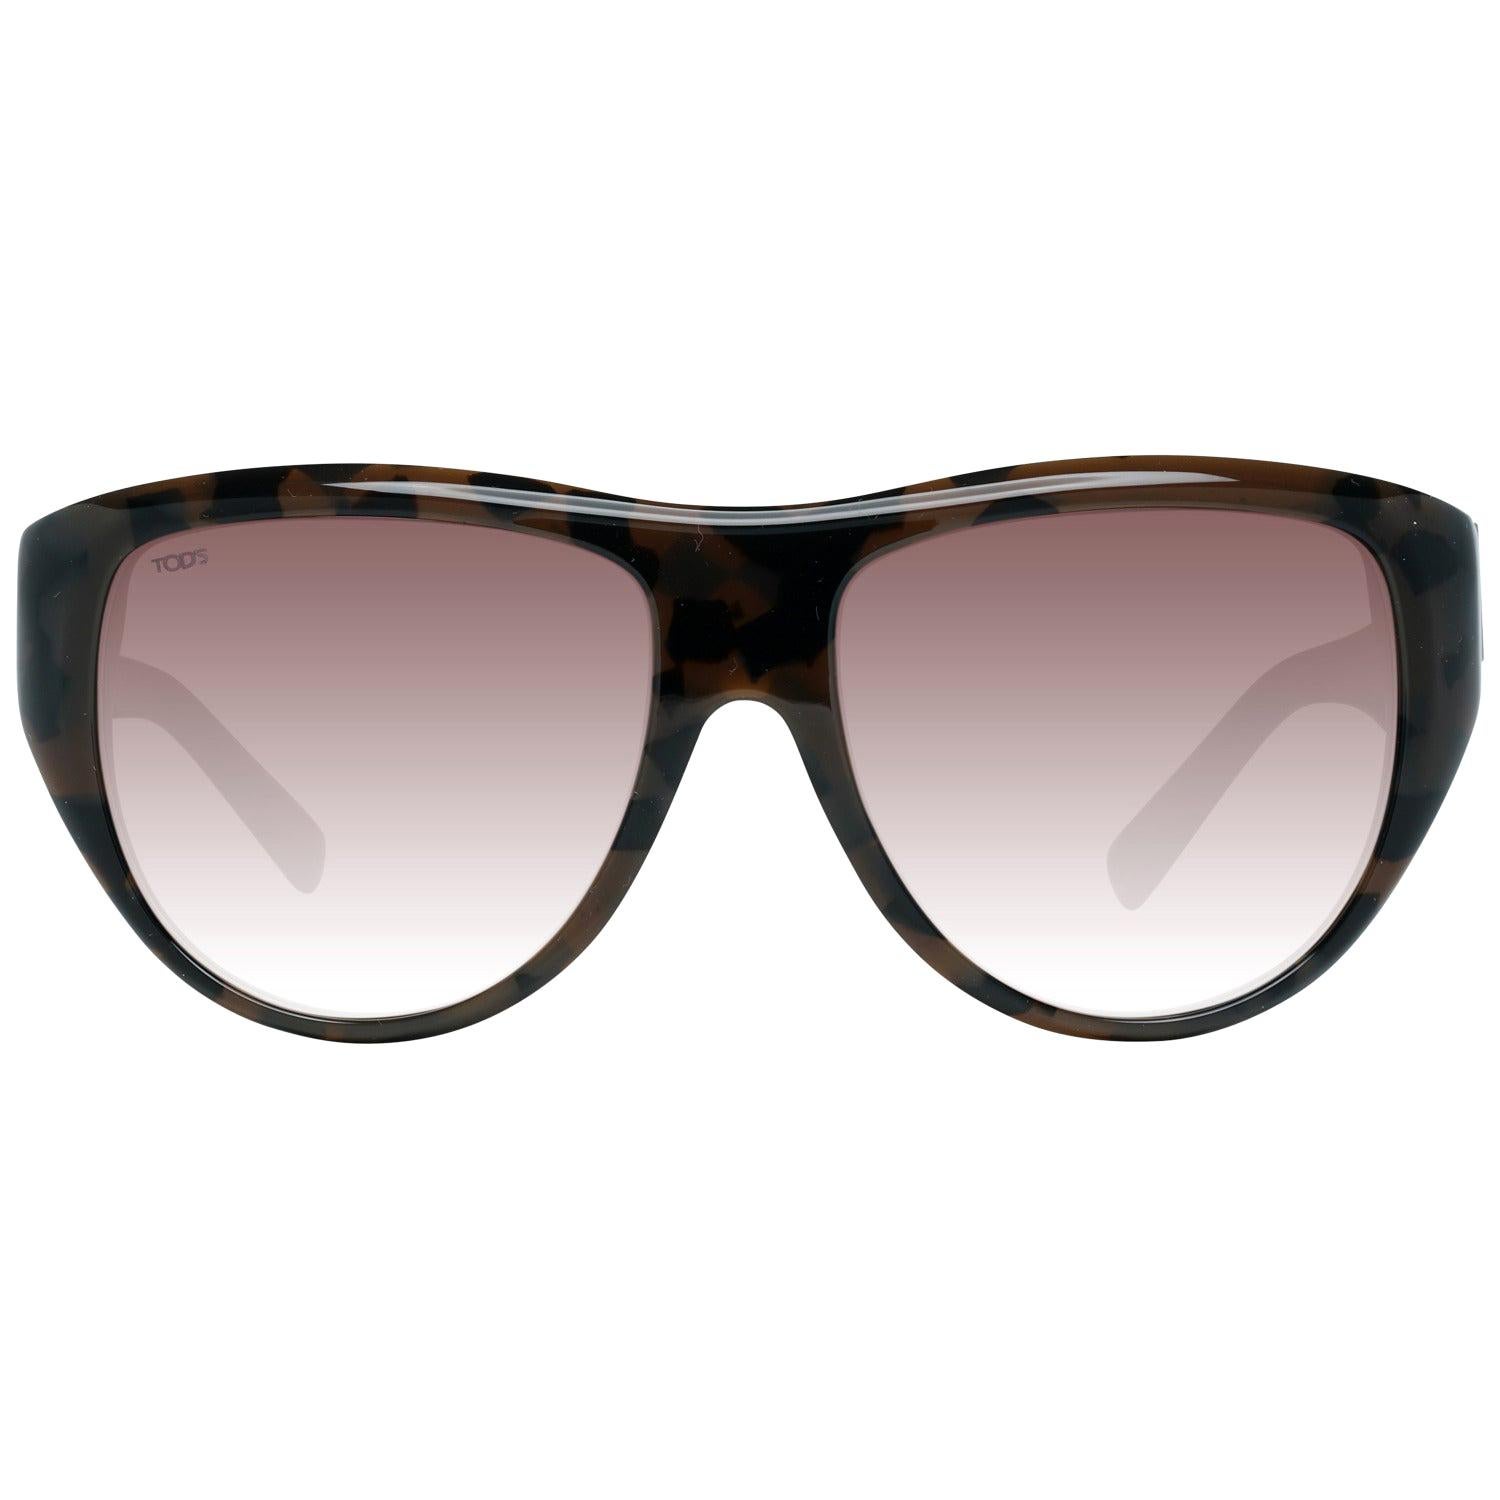 Tod's Mint Women Brown Sunglasses TO0226 5656F 56-16-150 mm